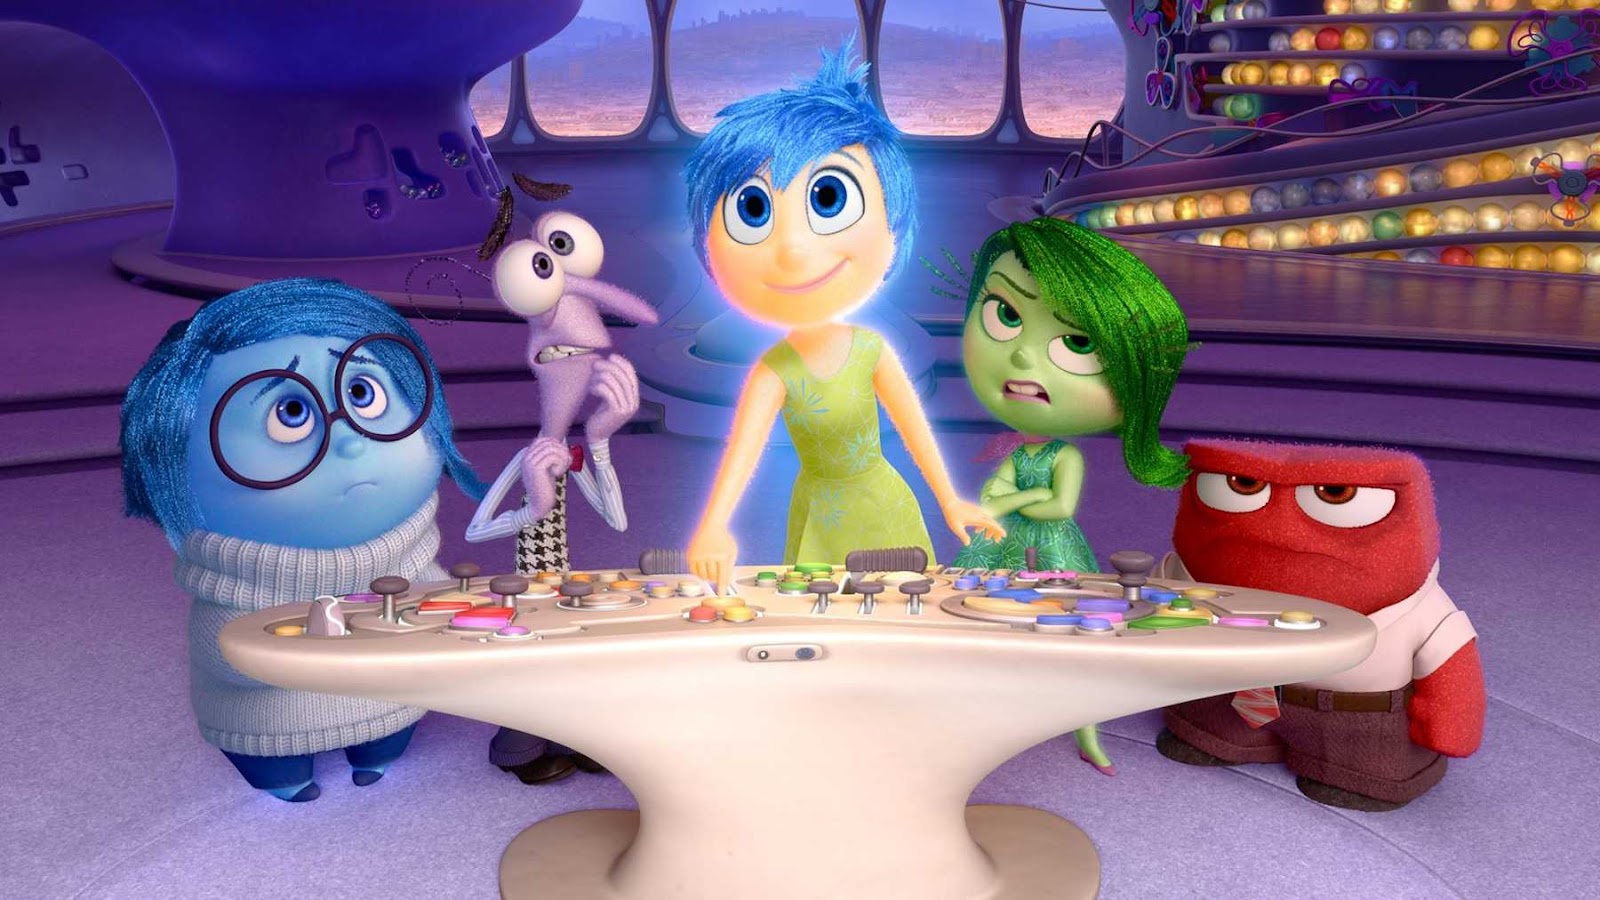 A screen still from Inside Out, featuring the emotions standing behind their control board. Behind them are glowing orbs.